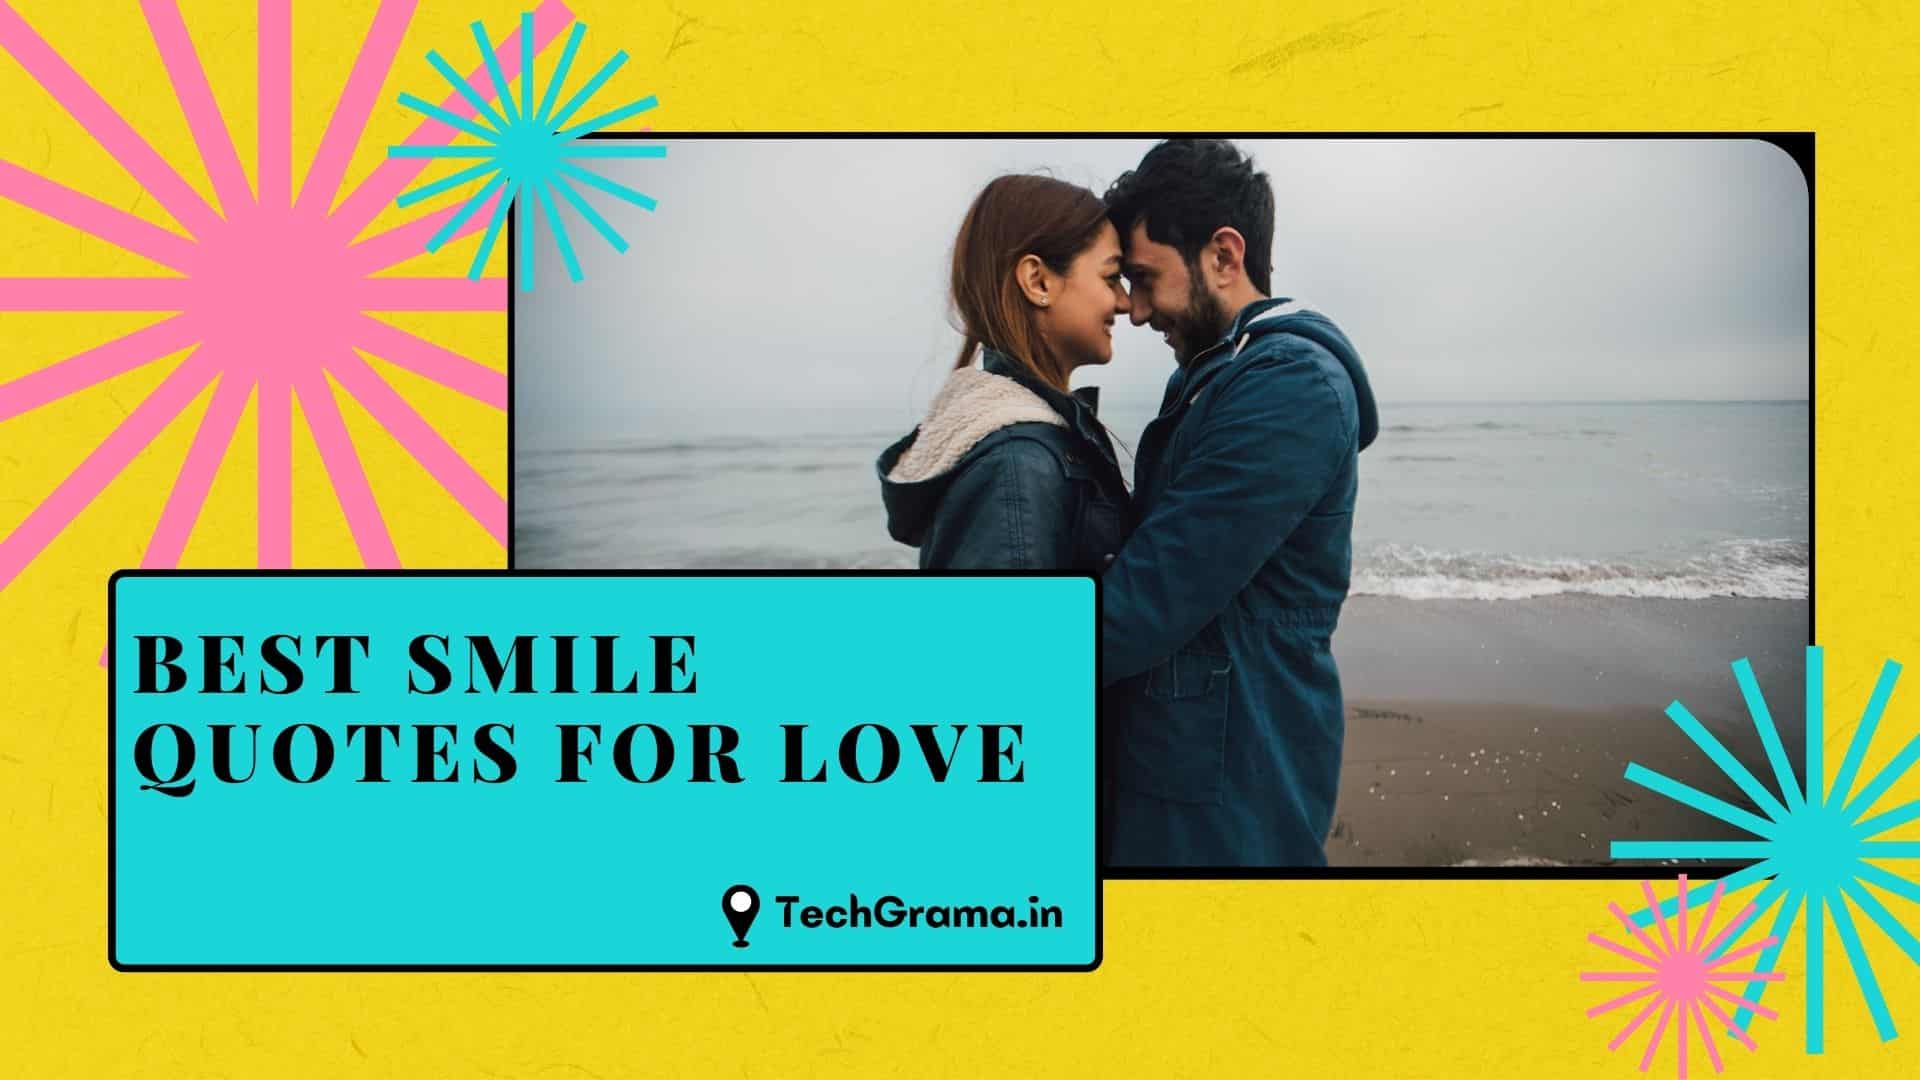 Best Smile Quotes For Love, Romantic Love Smile Quotes, Love Smile Quotes, Love Quotes About Her Smile, Love Life Smile Quotes, Love With Smile Quotes, Love Quotes on Smile, Love Relationship Smile Quotes, Smile Couple Quotes, Quotes About Smile And Love, Love Your Smile Quotes, Love Smile Quotes For Him & Her.